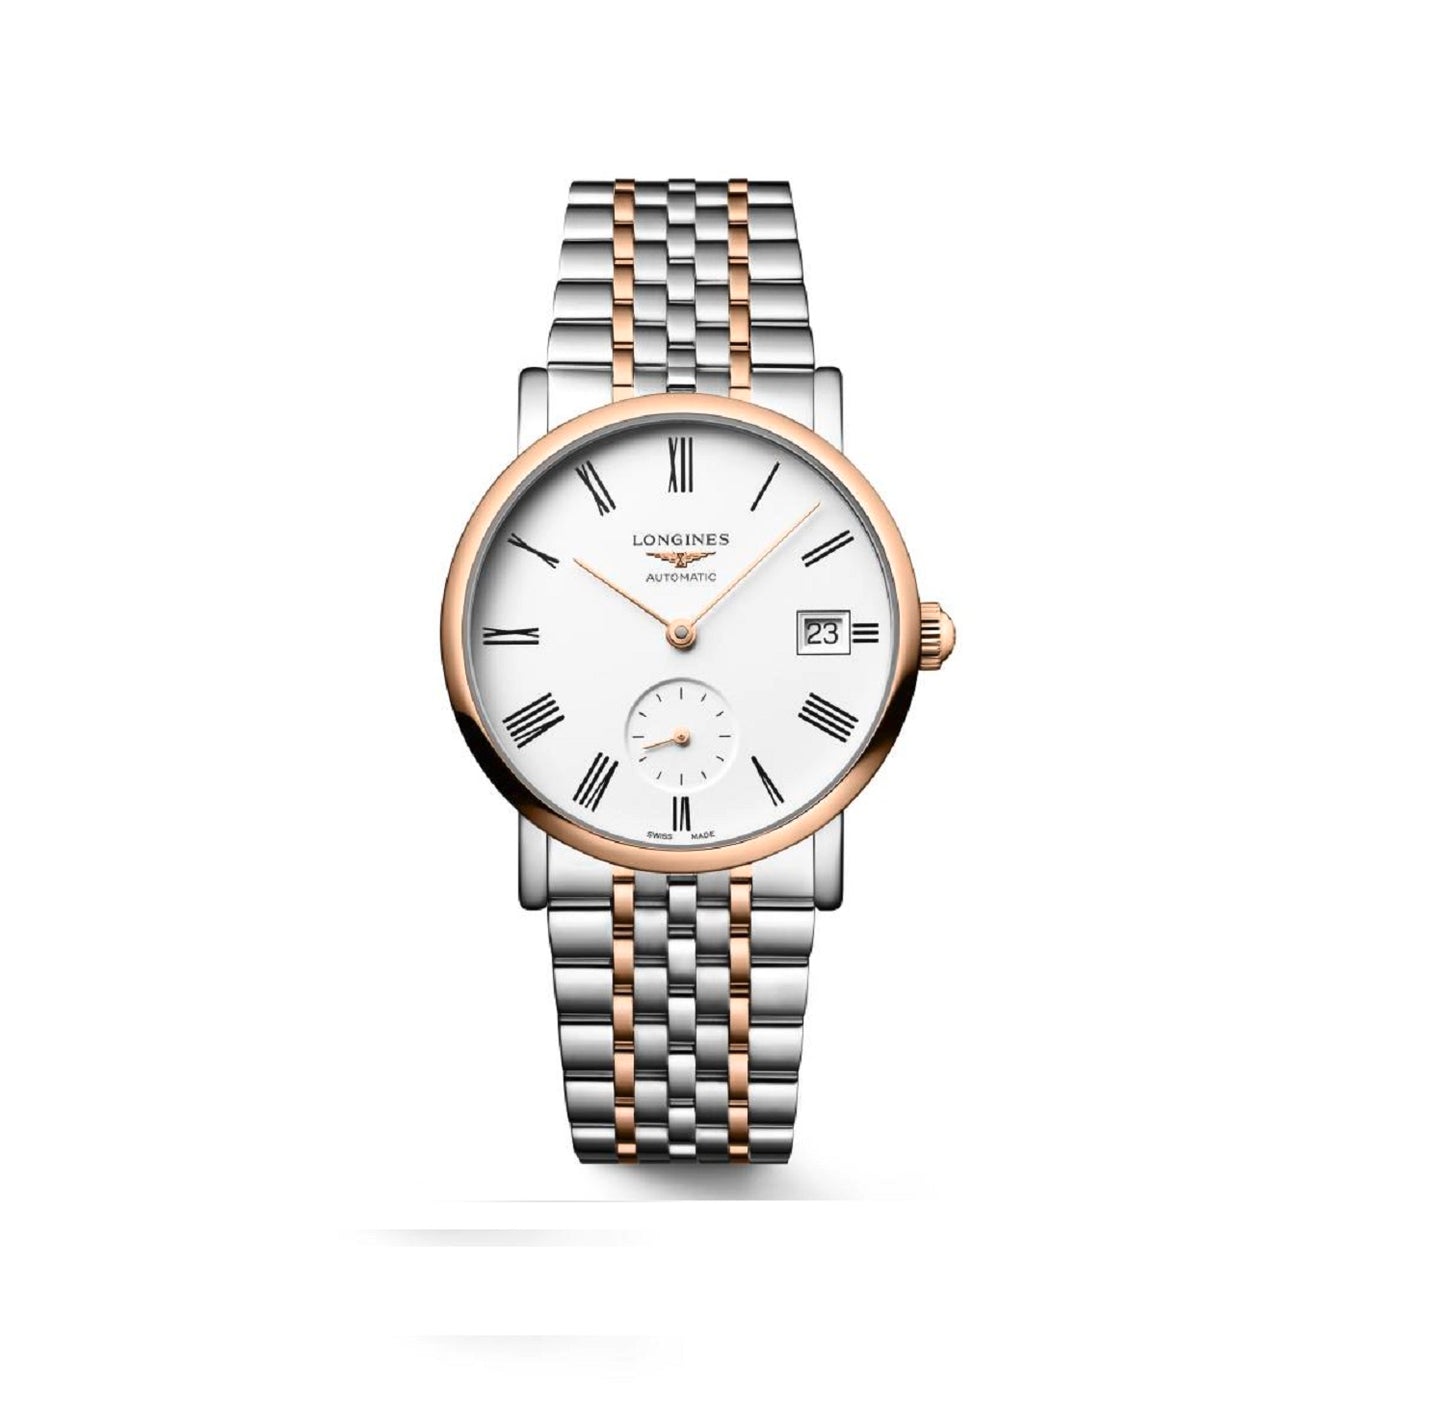 The Longines Elegant Female Analog Stainless Steel Watch L43125117